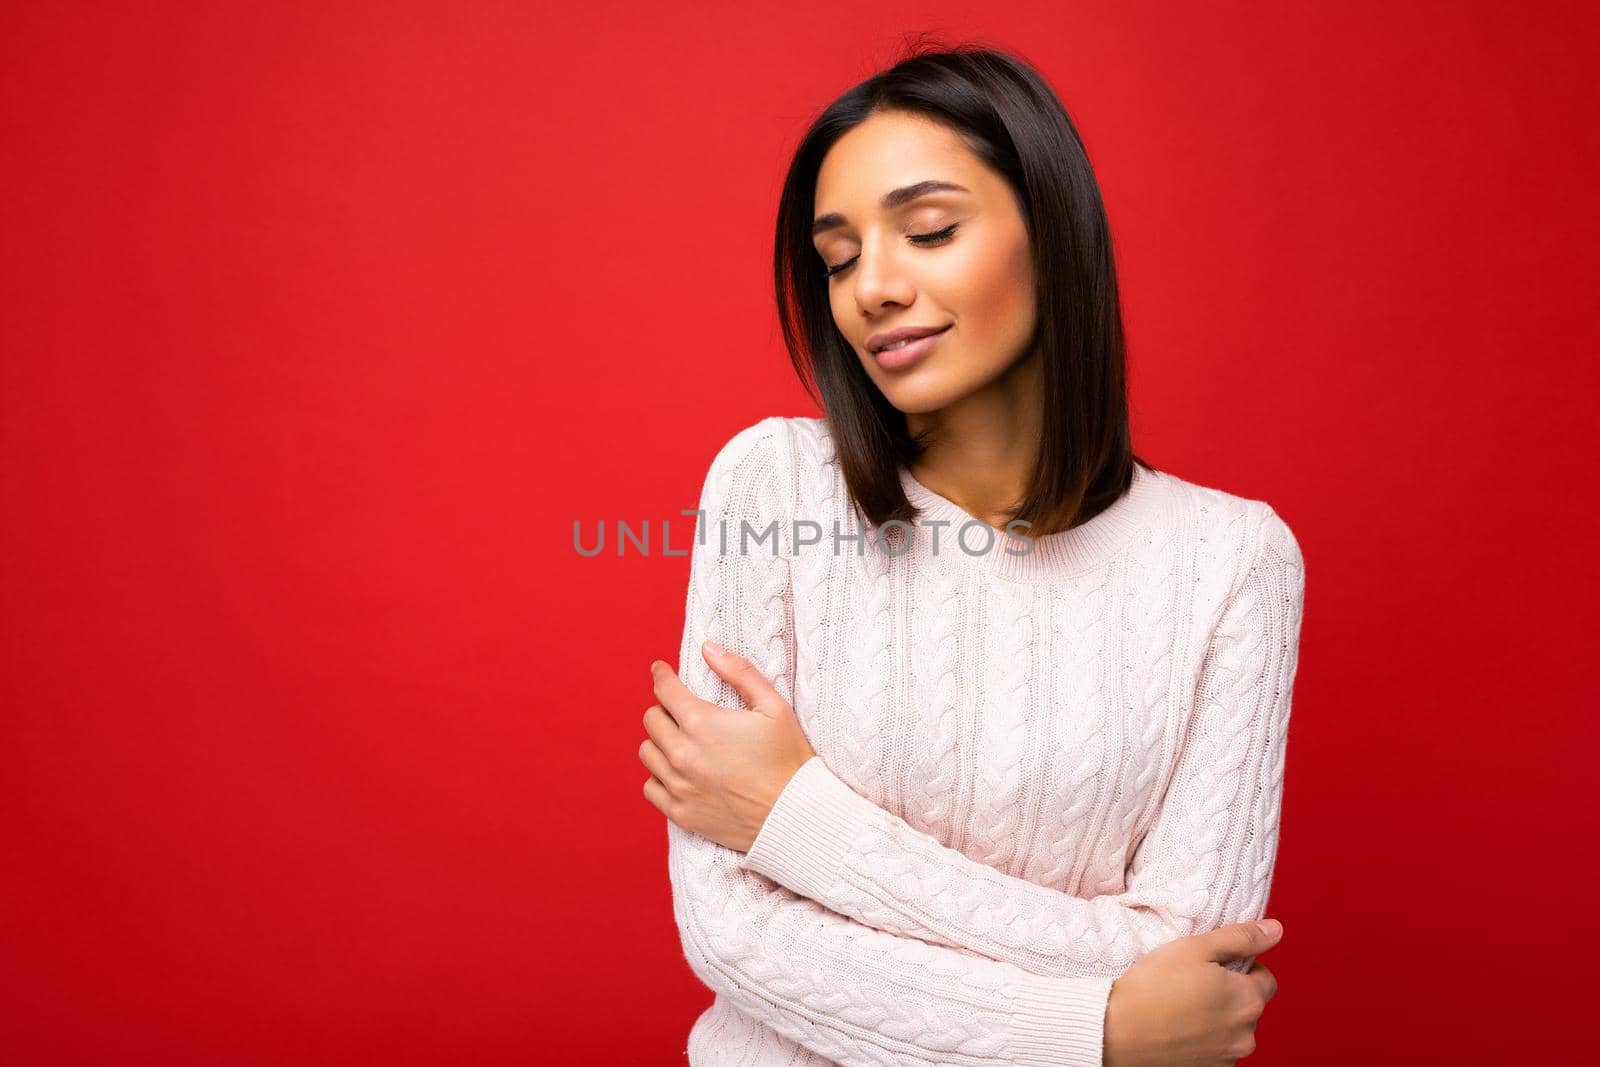 Attractive happy positive cute nice adorable tender young brunette woman in casual light knitted sweater isolated on red background with free space and enjoying.